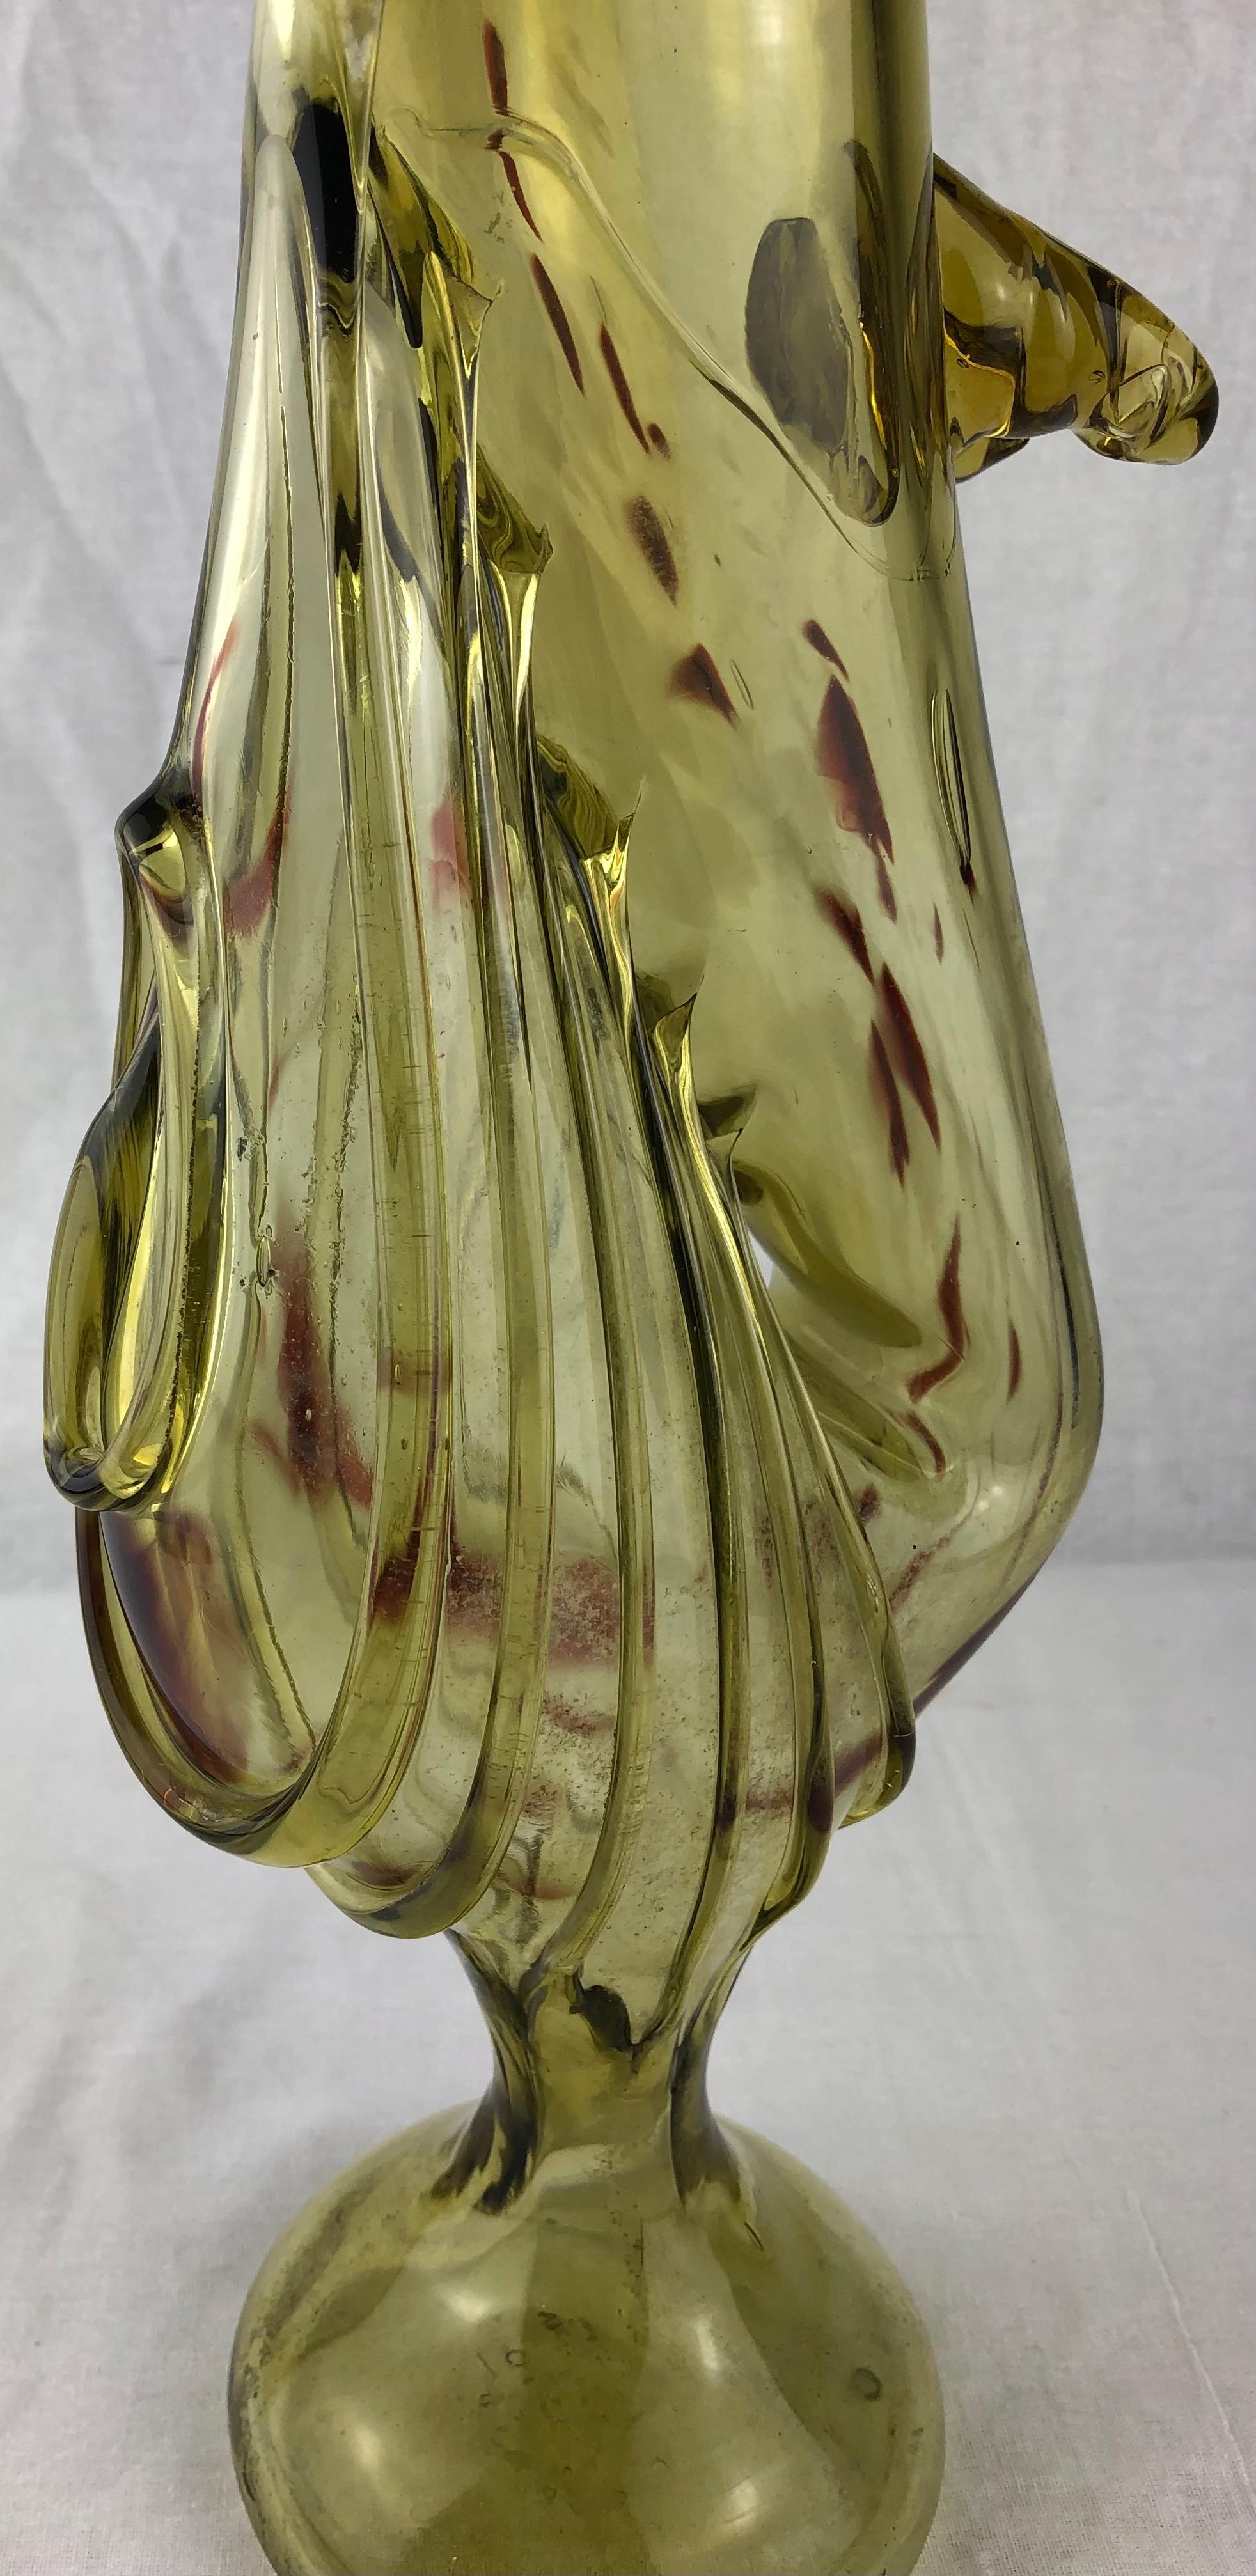 Tan France Auction Pick

Murano art glass flower vase in a beautiful unusual form. This lovely hand-crafted vase is perfect for displaying your favorite flowers.

Will enhance any table, shelf or countertop. 

Dimensions:
Depth  4.13 in. x Width